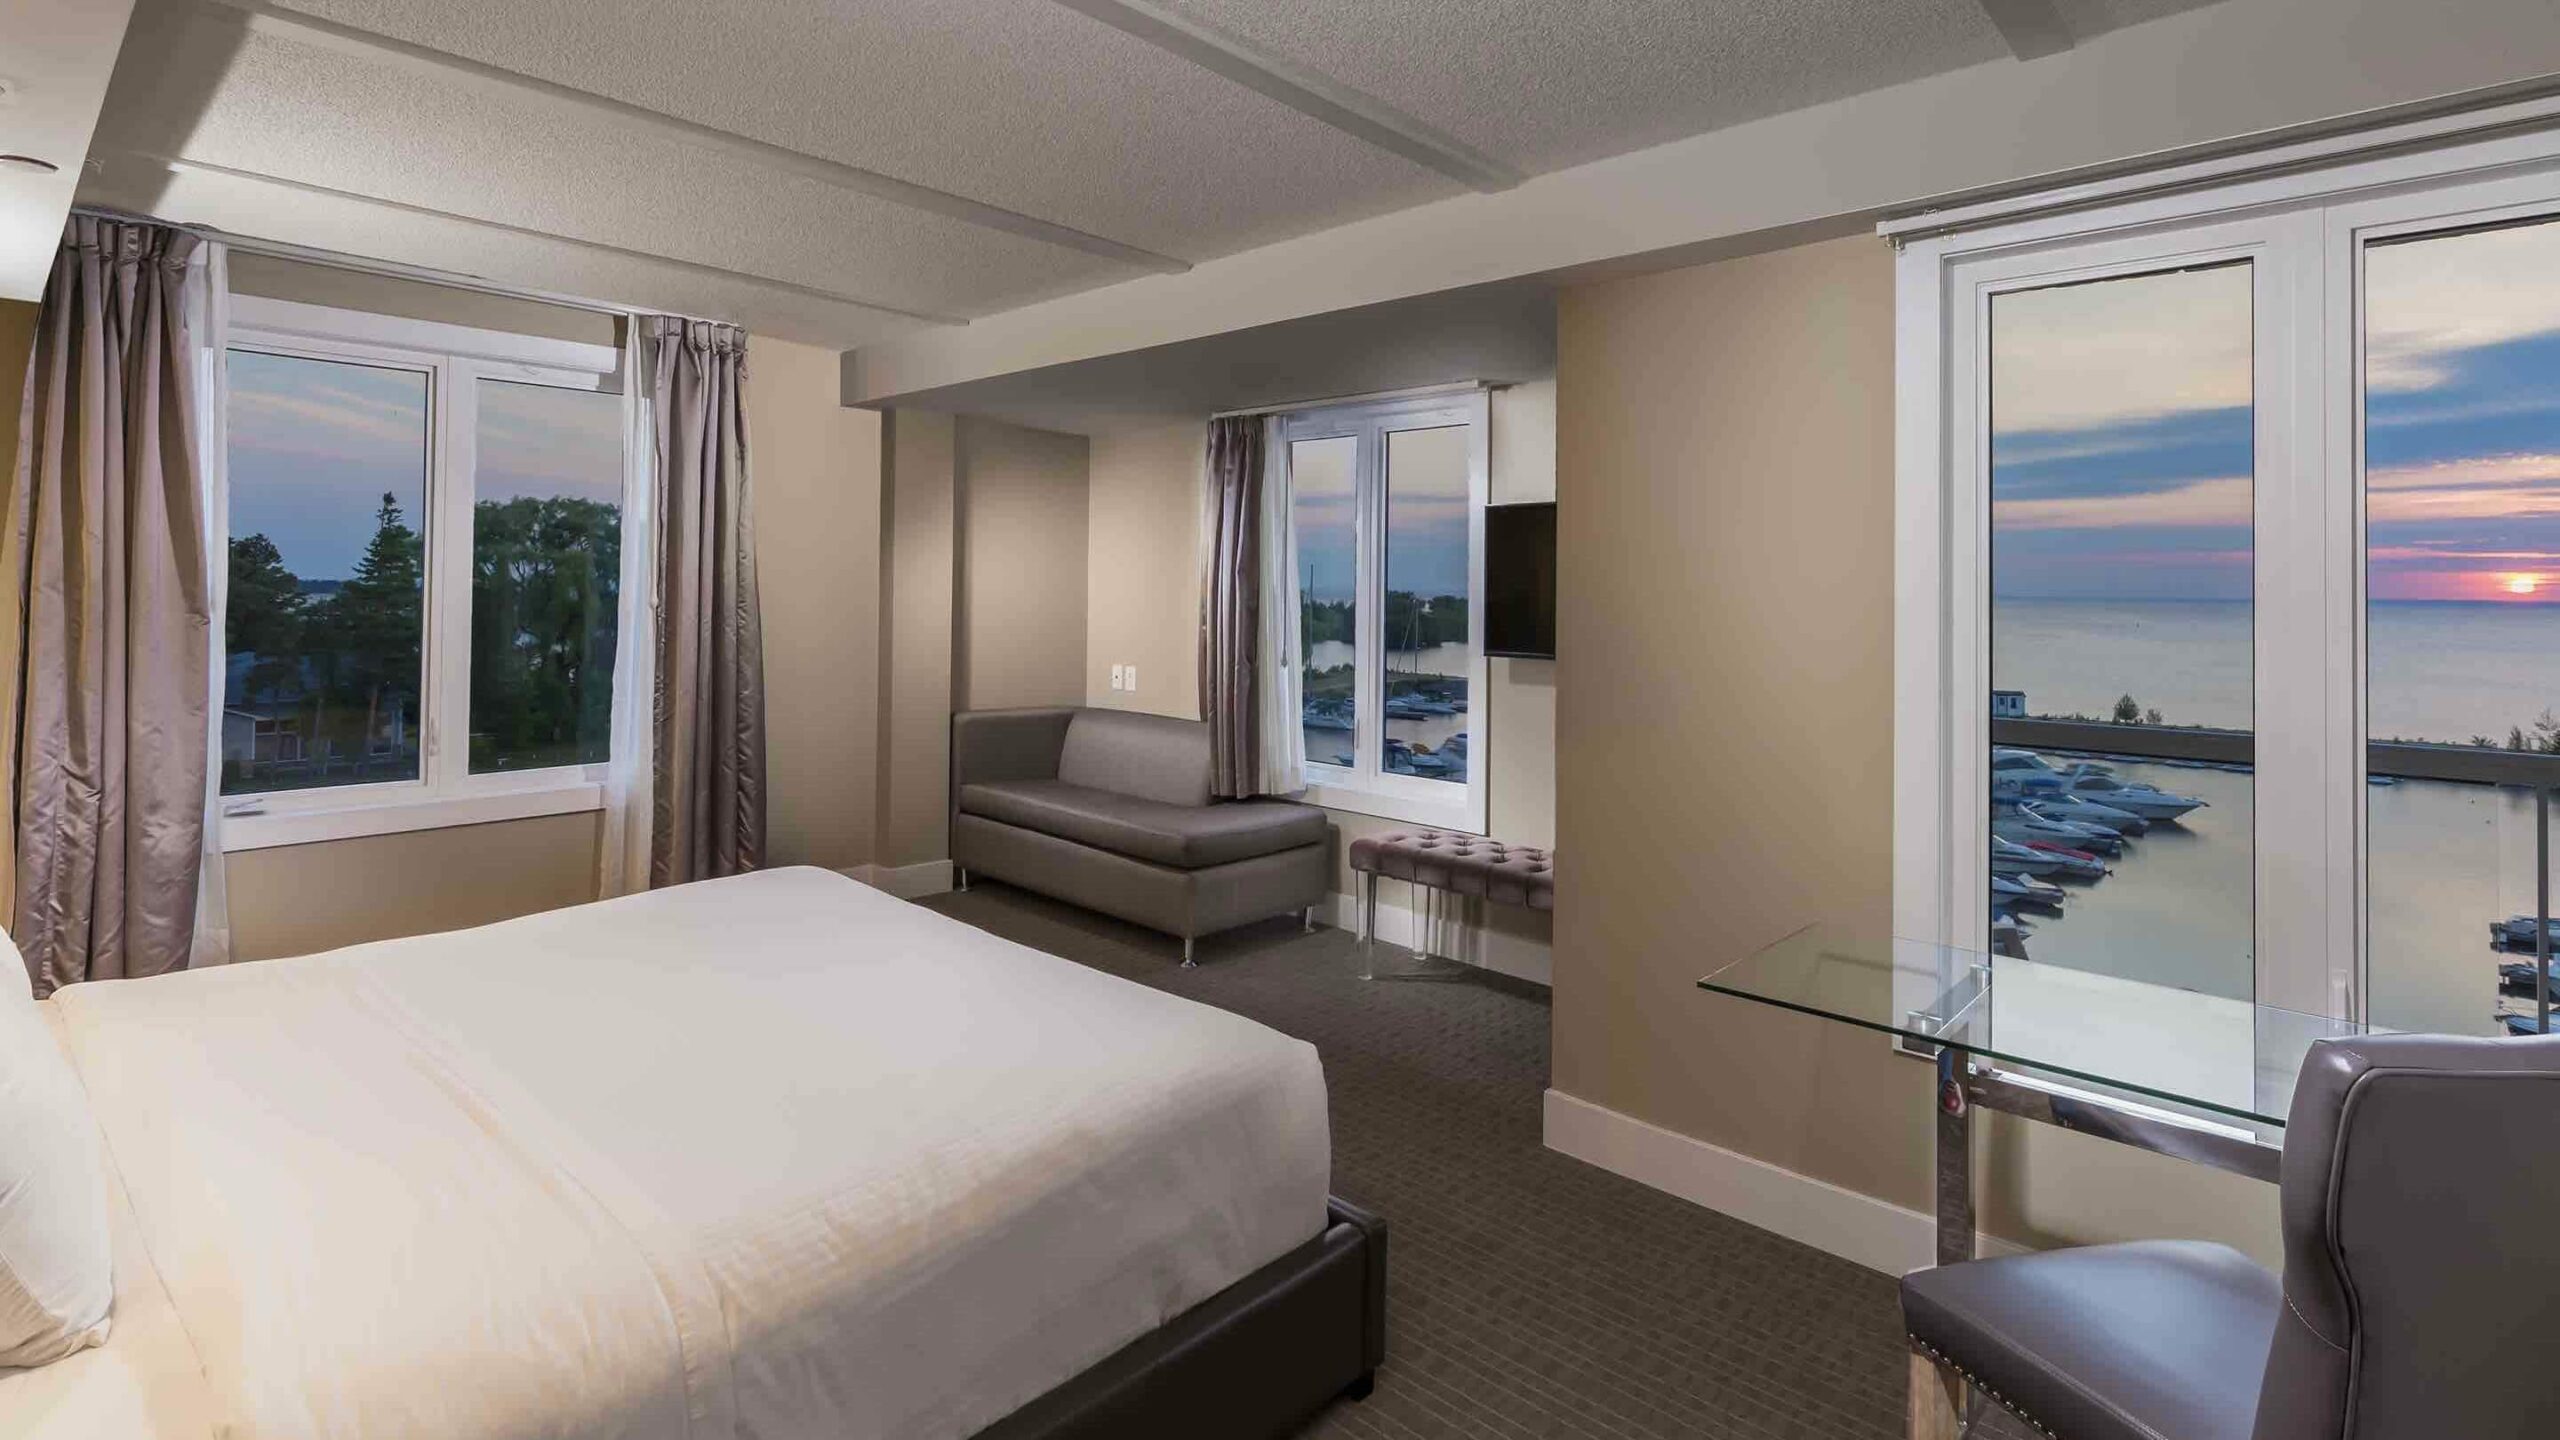 Request one of the marina view rooms when visiting Living Water Resort (Photo courtesy Living Water Resort & Spa)